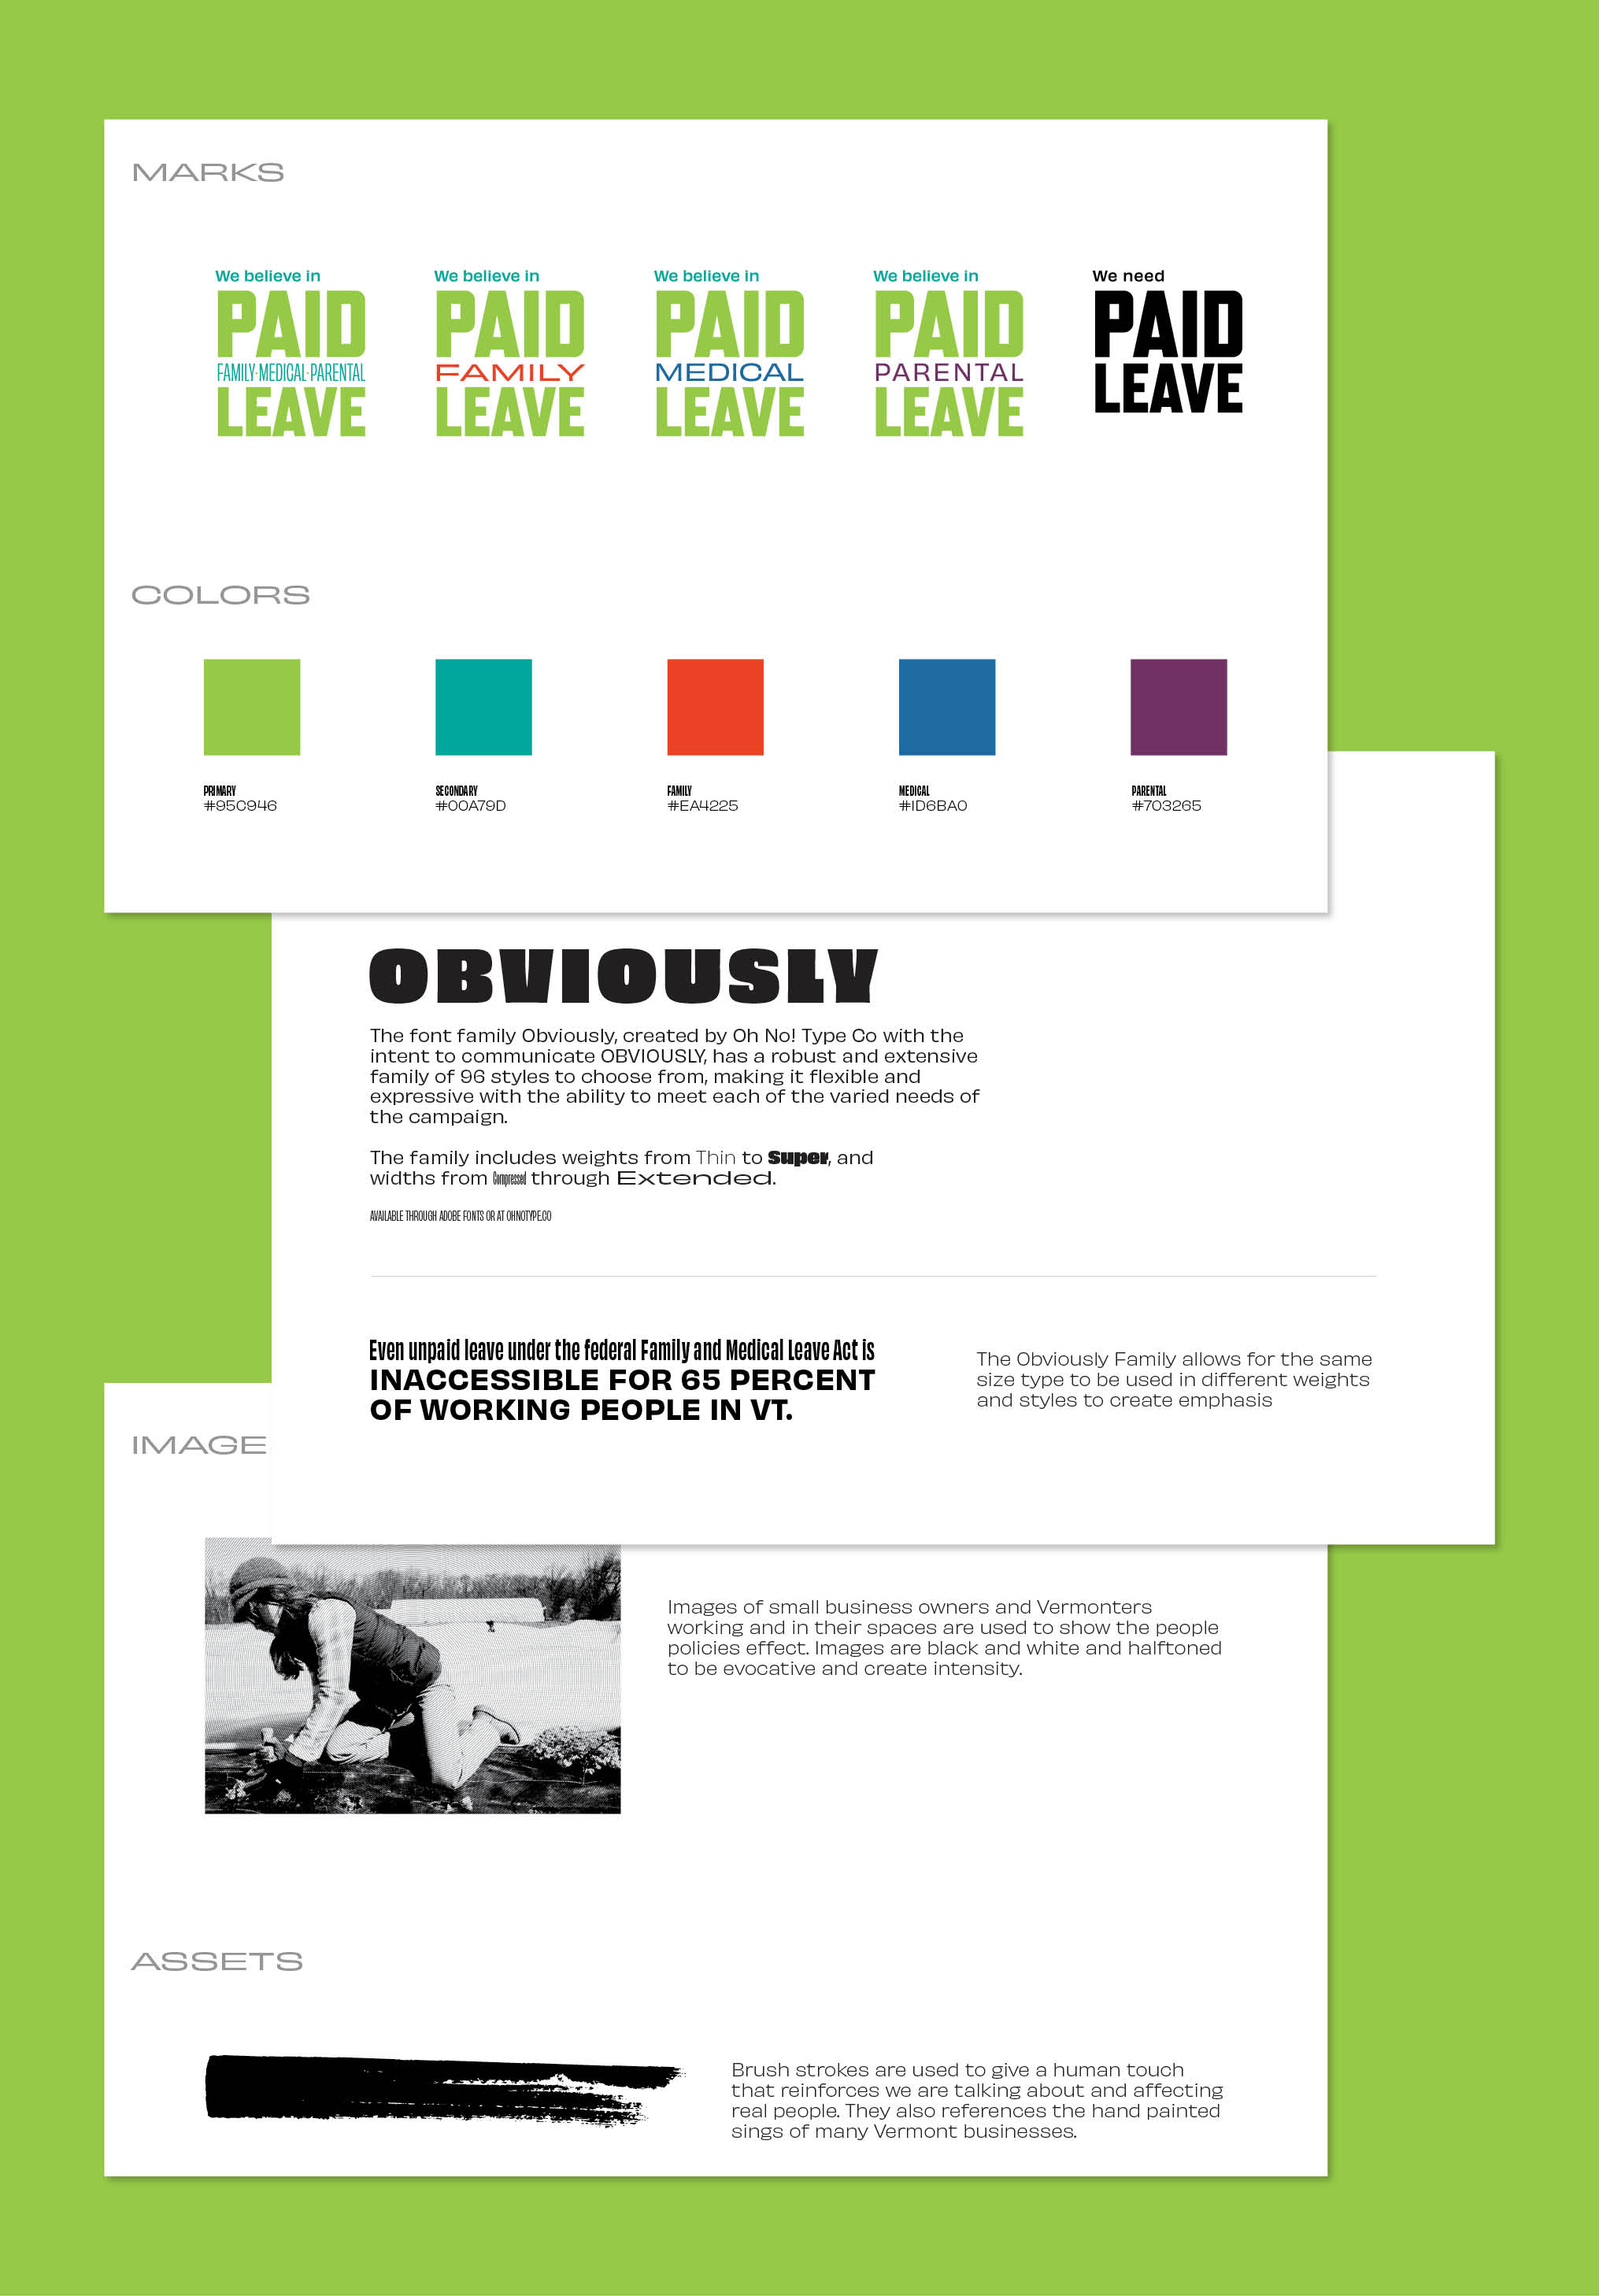 A Sample of three pages form the We Believe in Paid Leave campaign brand guide outlining alternative logo marks, colors, fonts, and guidance for image usage.